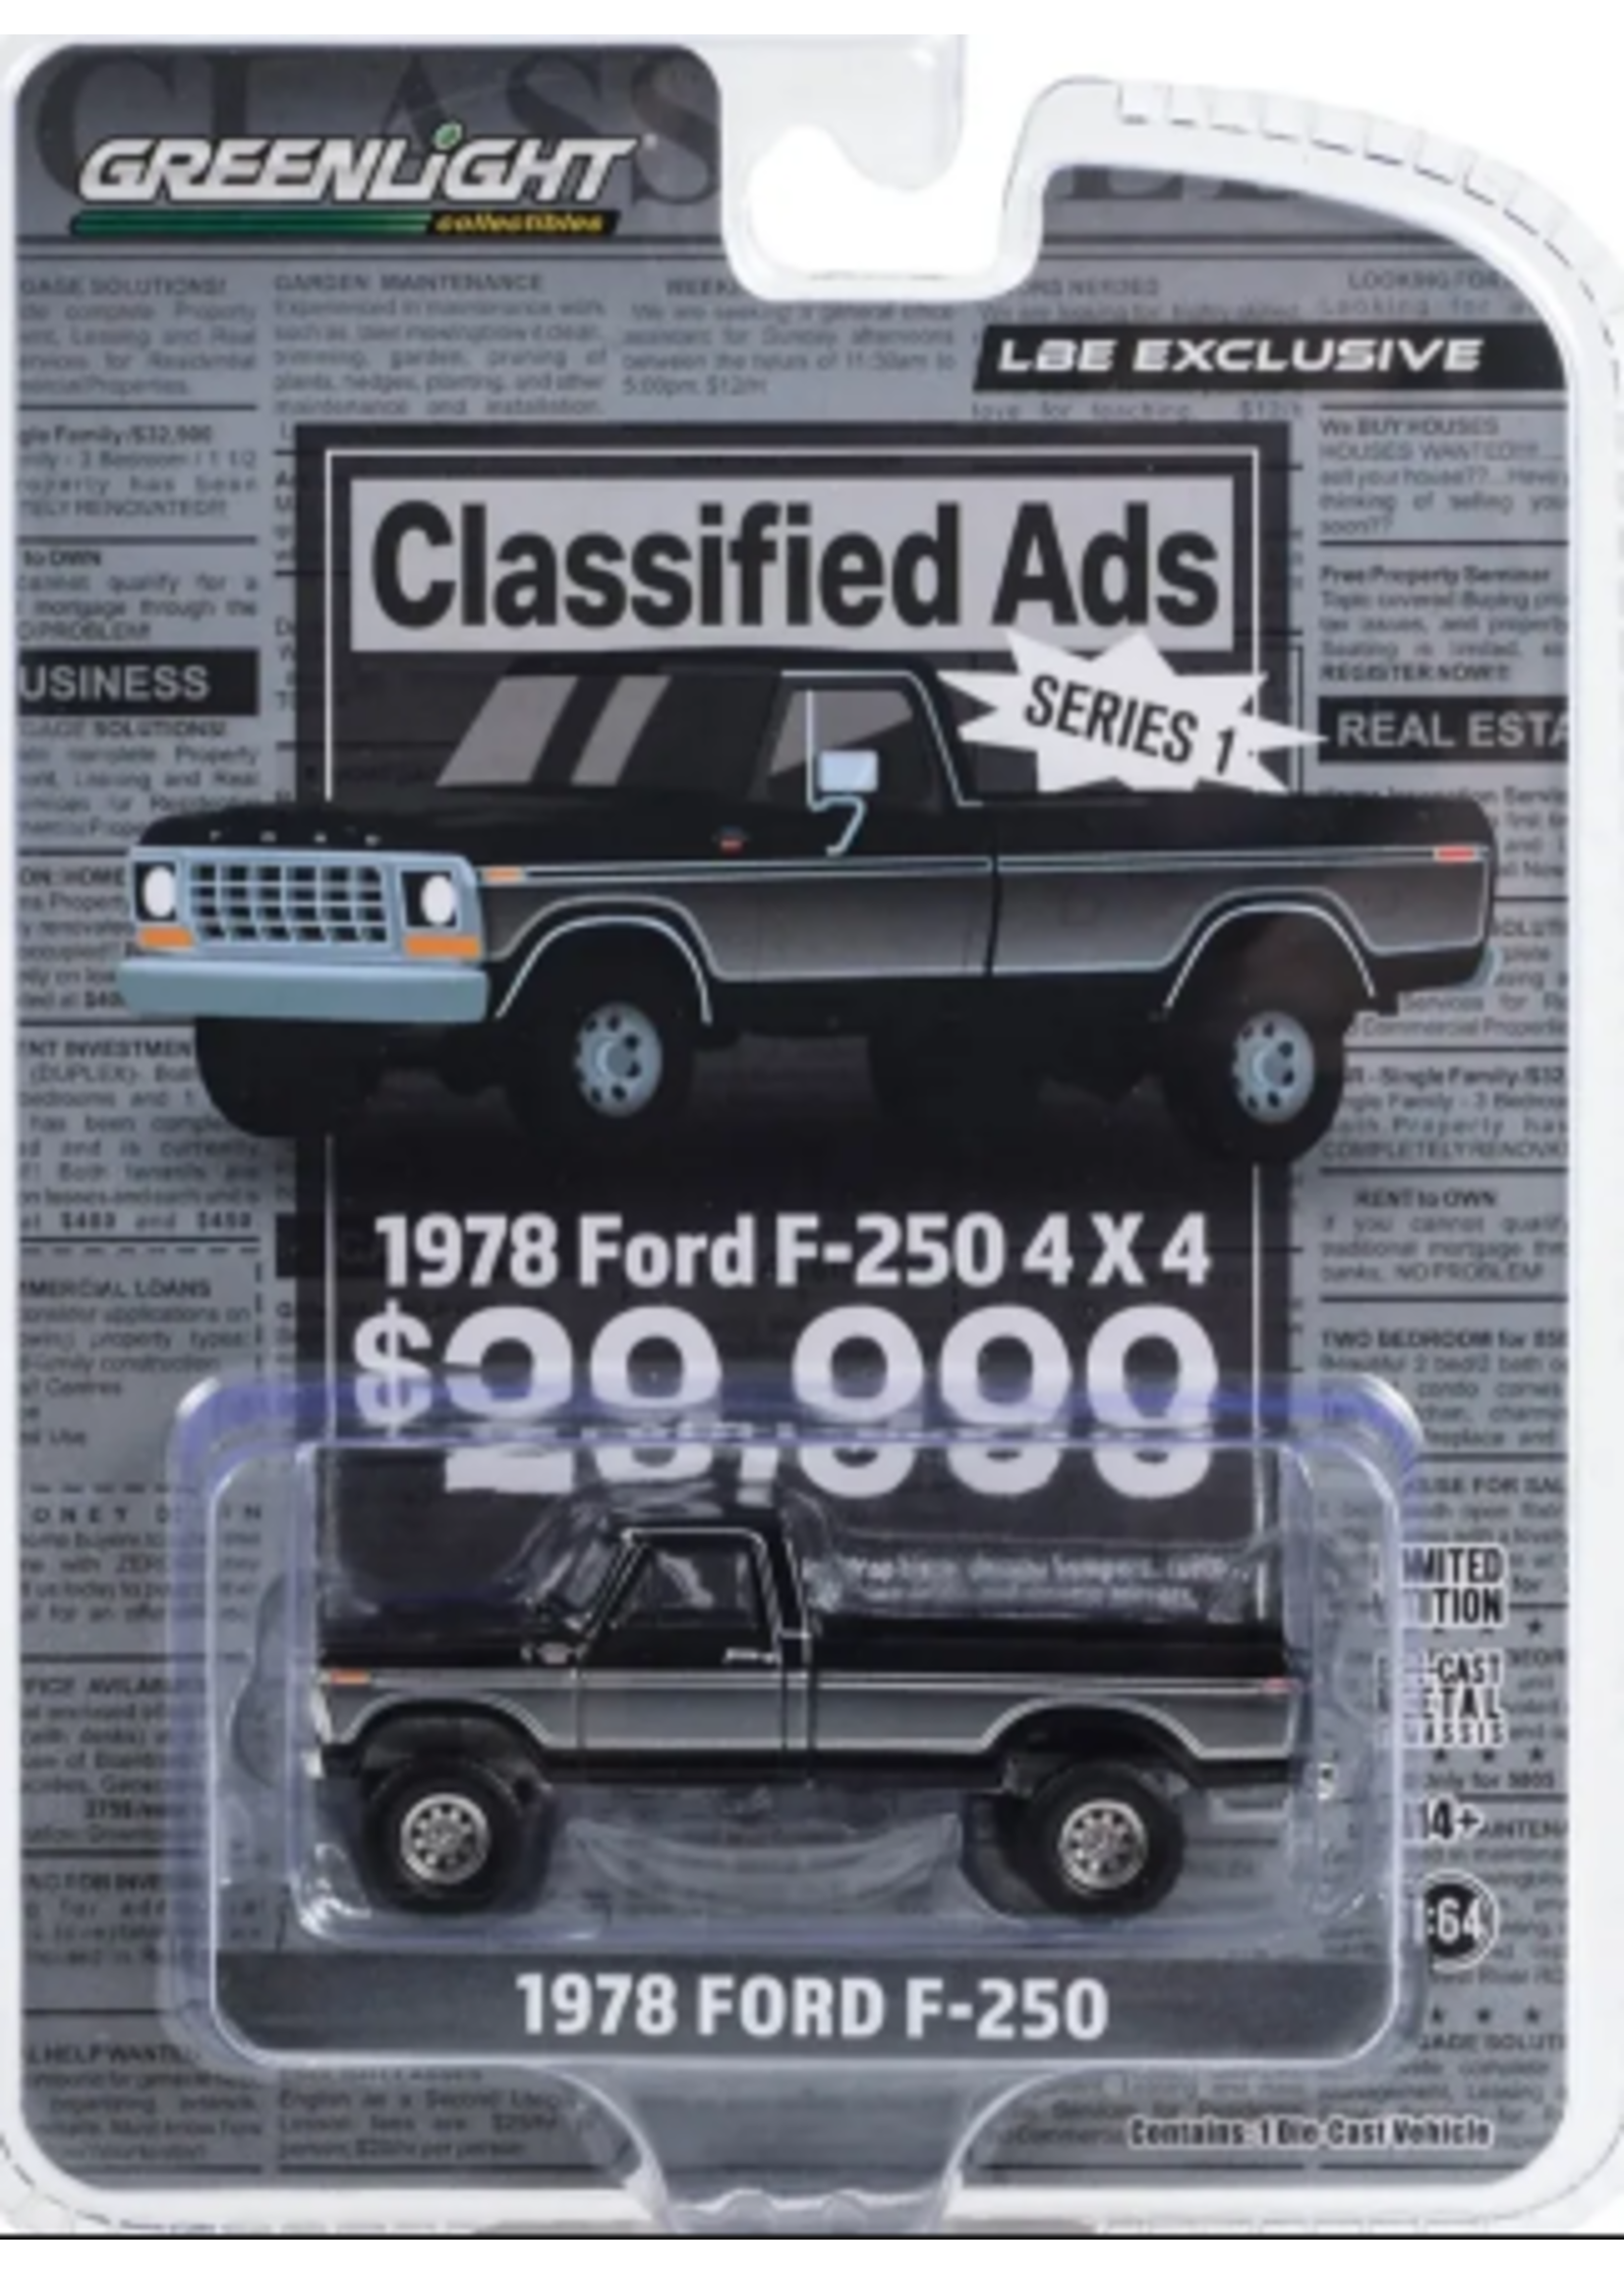 1/64 Classified Ads Series 1 LBE diecast Exclusive 1978 Ford F-250 Black  Truck Greenlight Toys - SNS Farm Toys